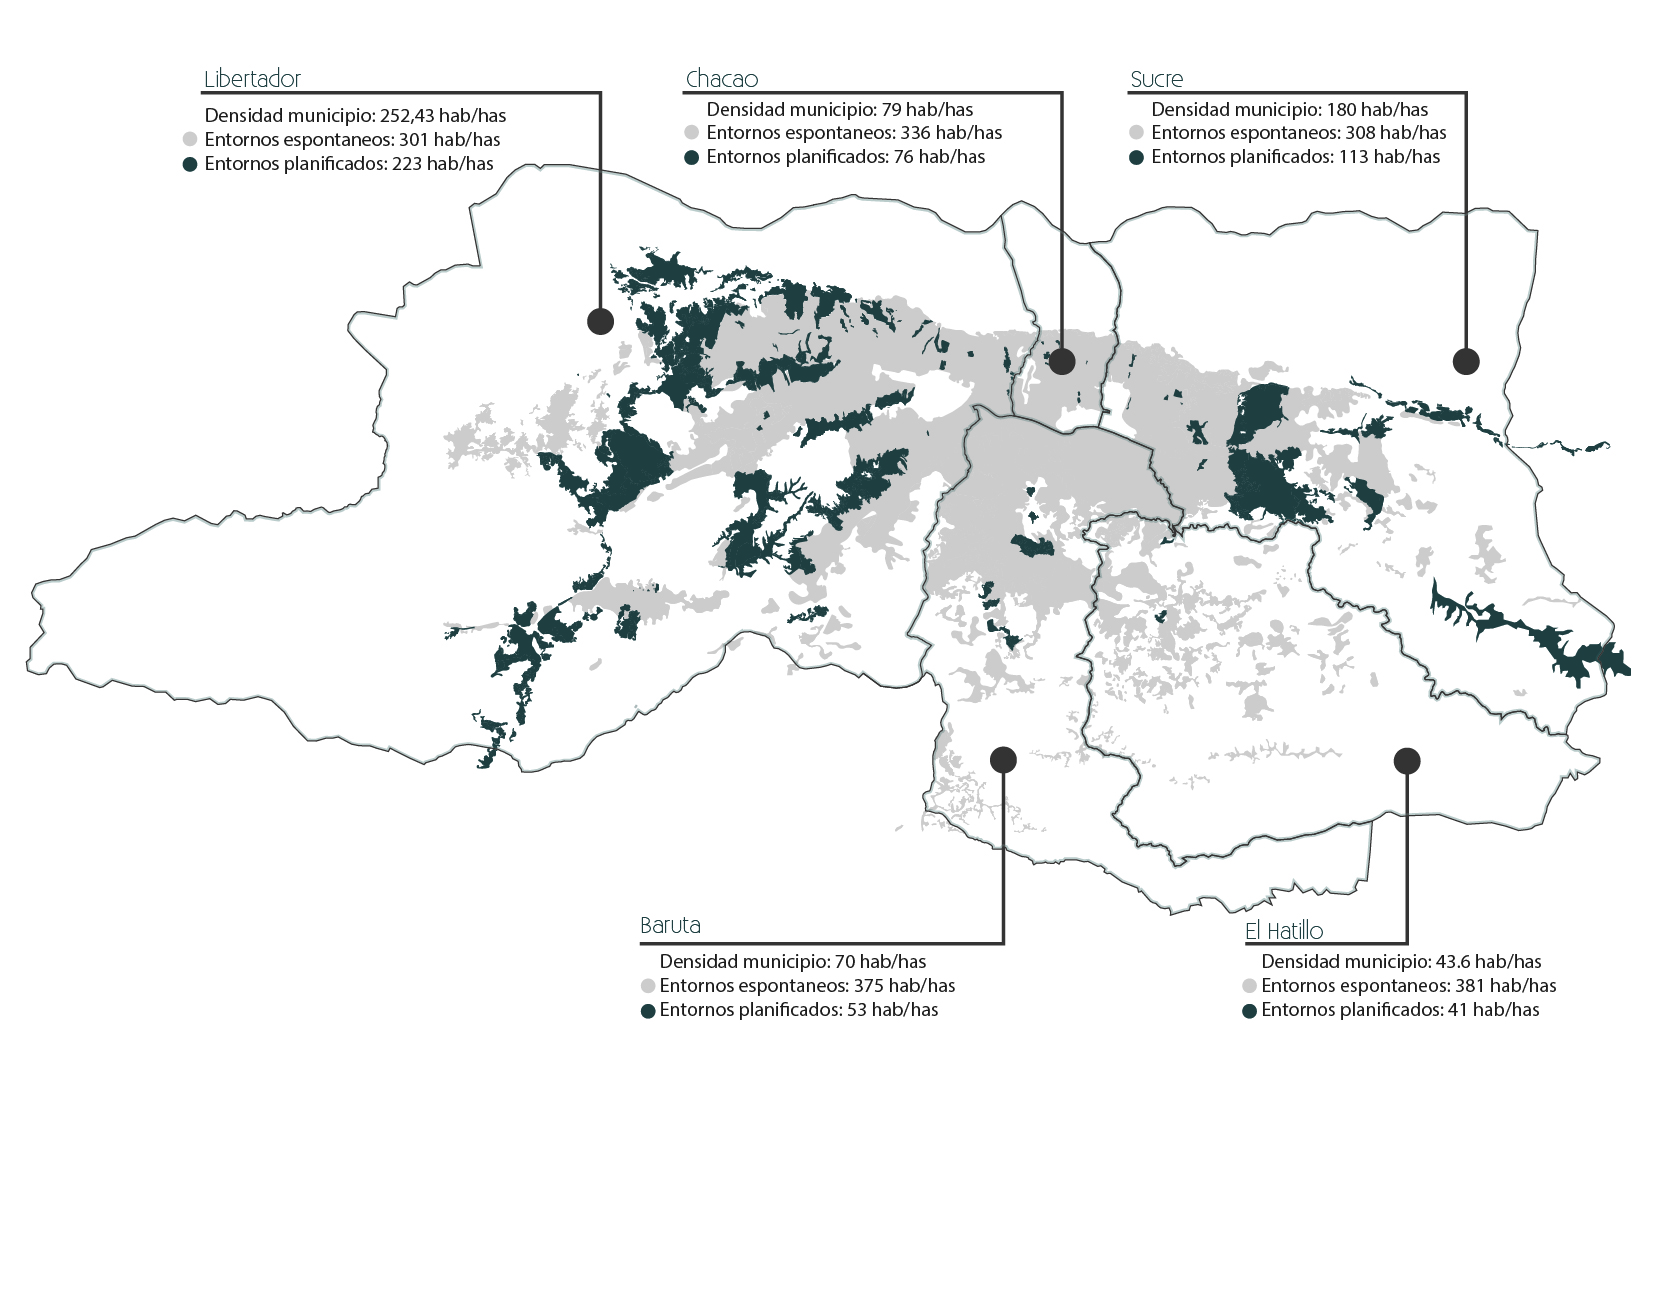 The political implications of territorial inequality in Caracas, Venezuela